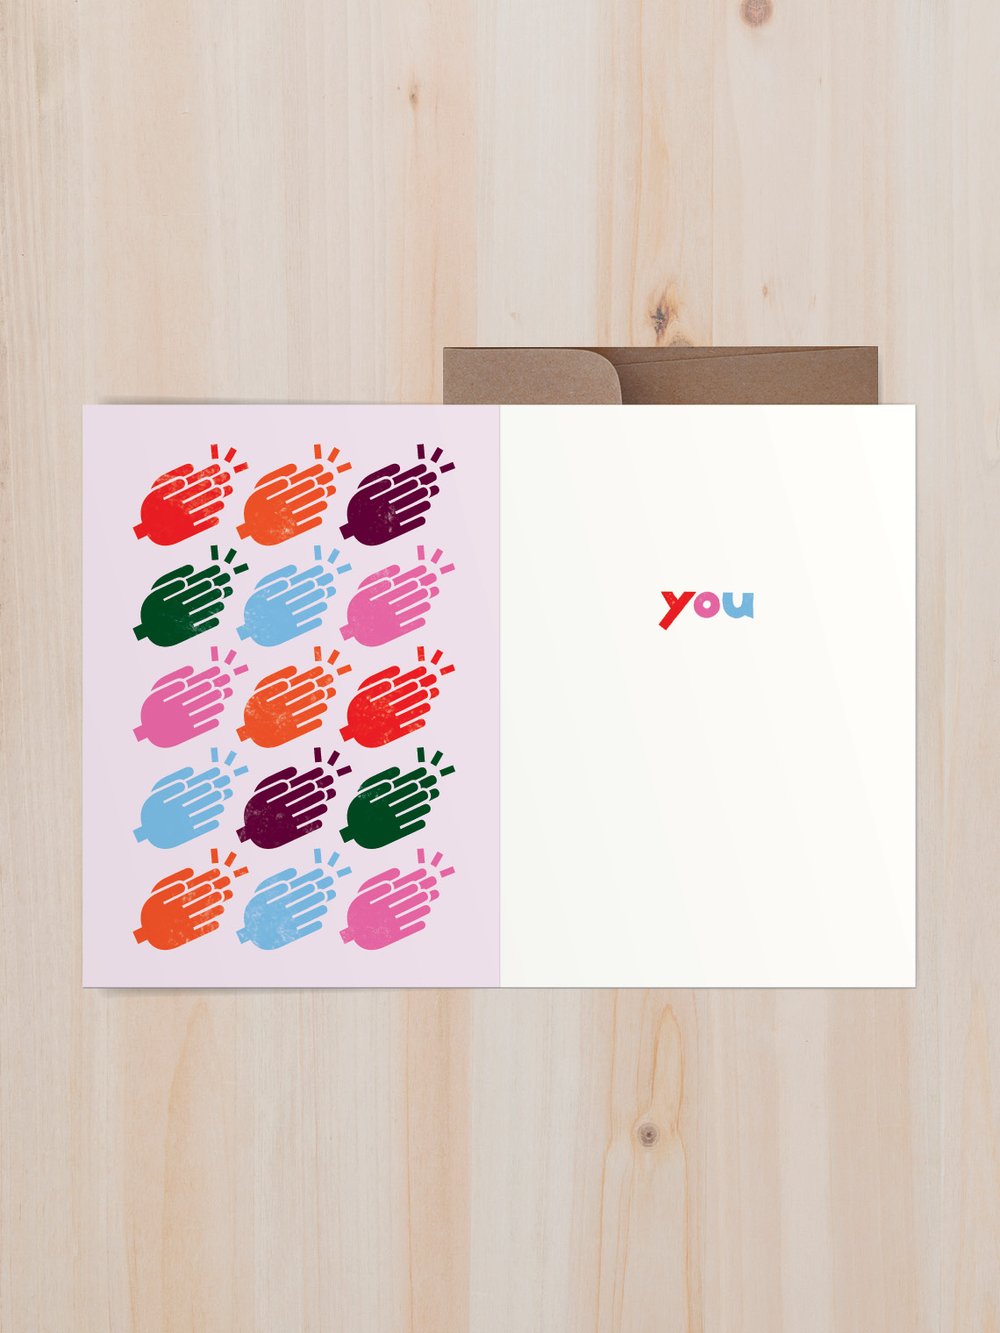 I Love You Card Interview Card — The Handcrafted Story